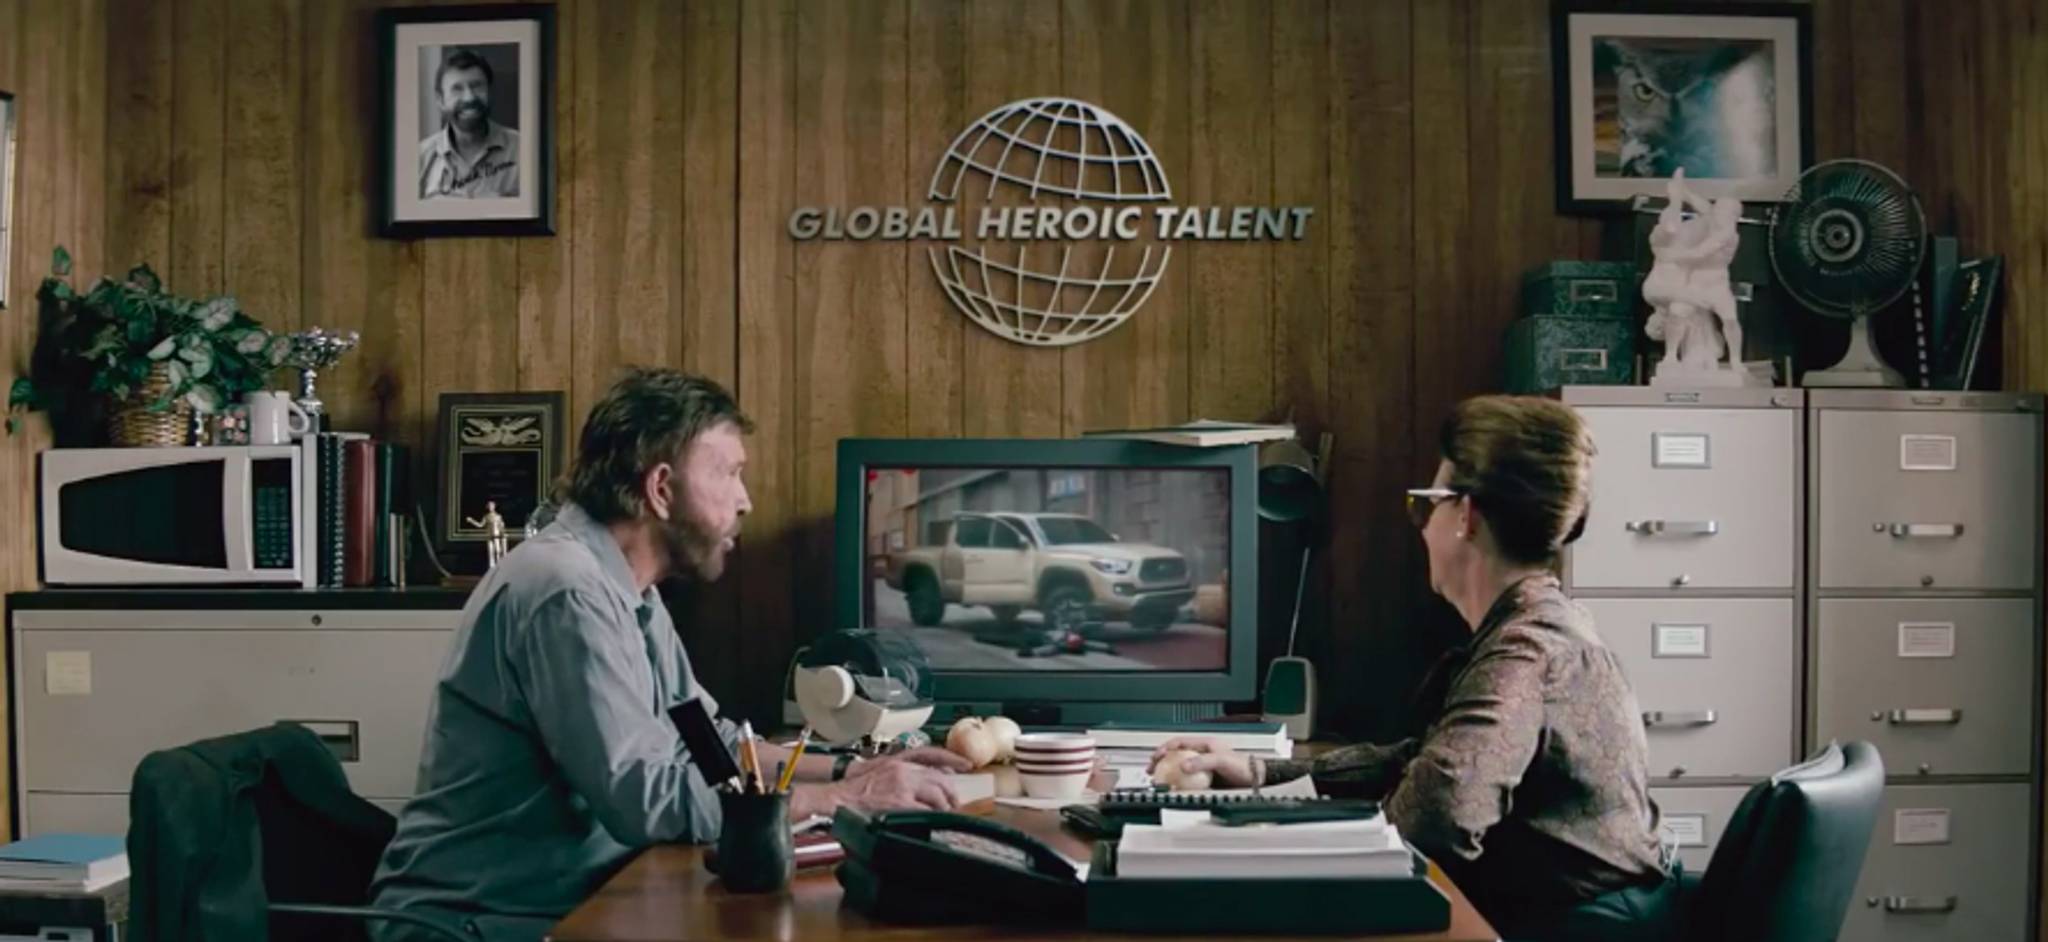 Chuck Norris ad goes back to Meme culture's early days